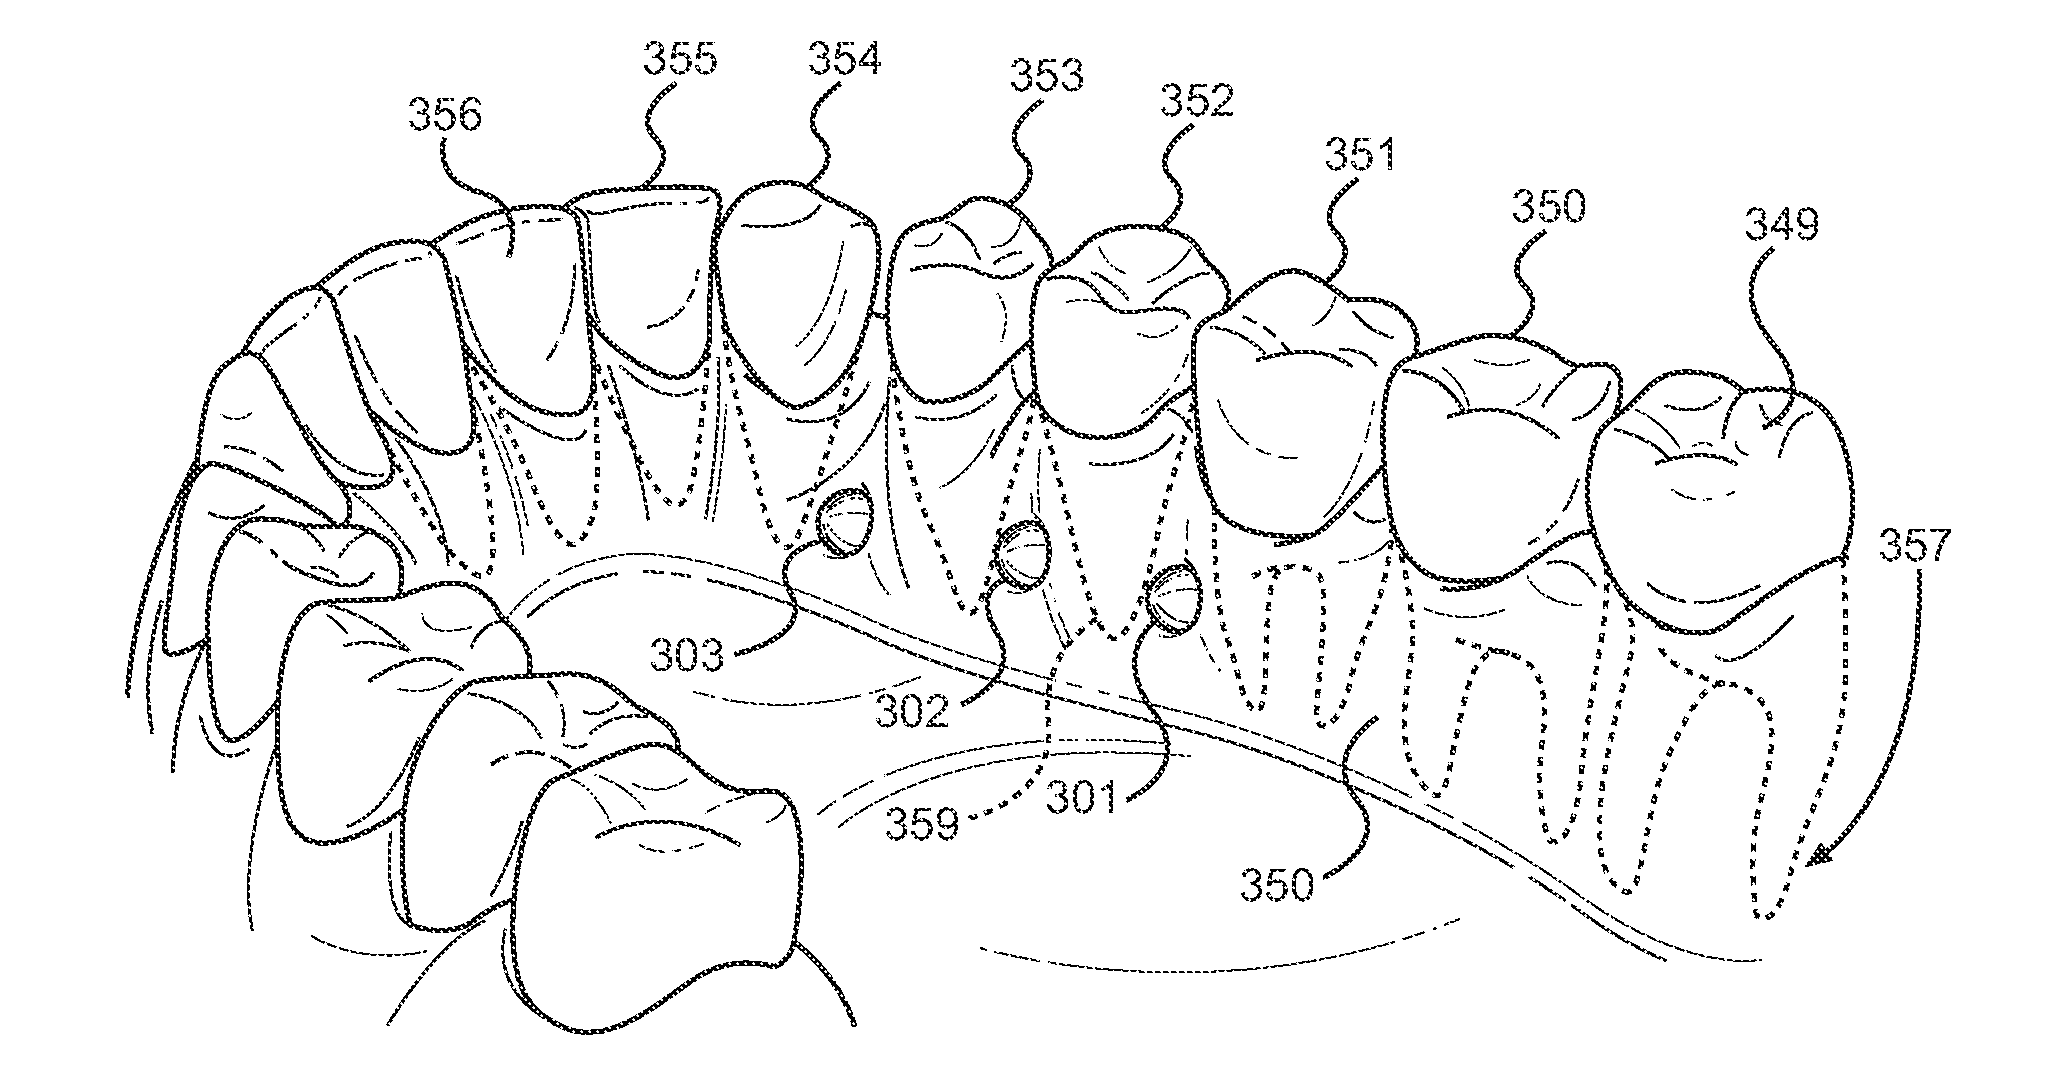 System and Method of Installing Dental Prostheses for Passively Influencing Tongue Position to Reduce Airway Obstruction